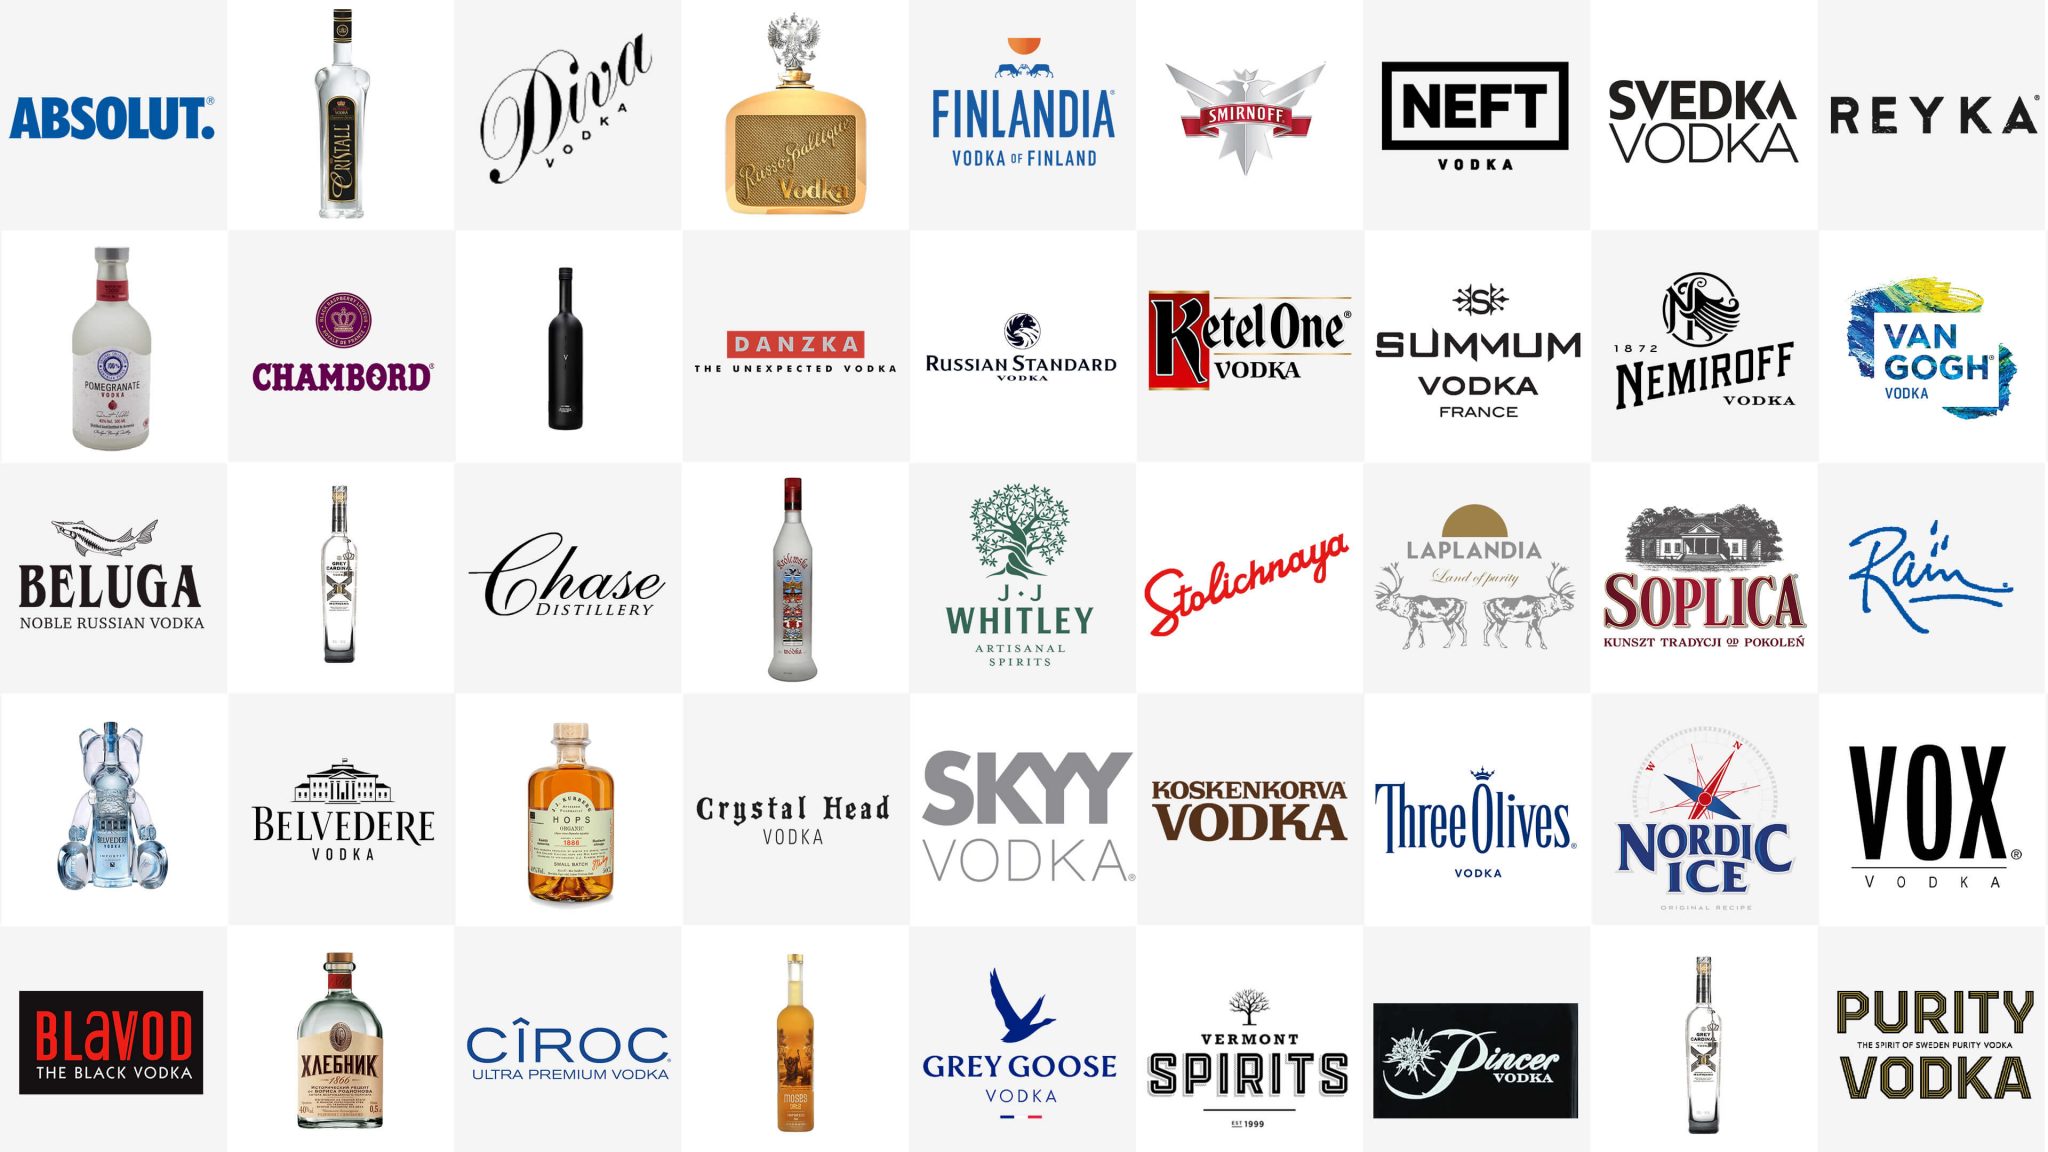 The 44 World’s Best Vodka Brands and Logos